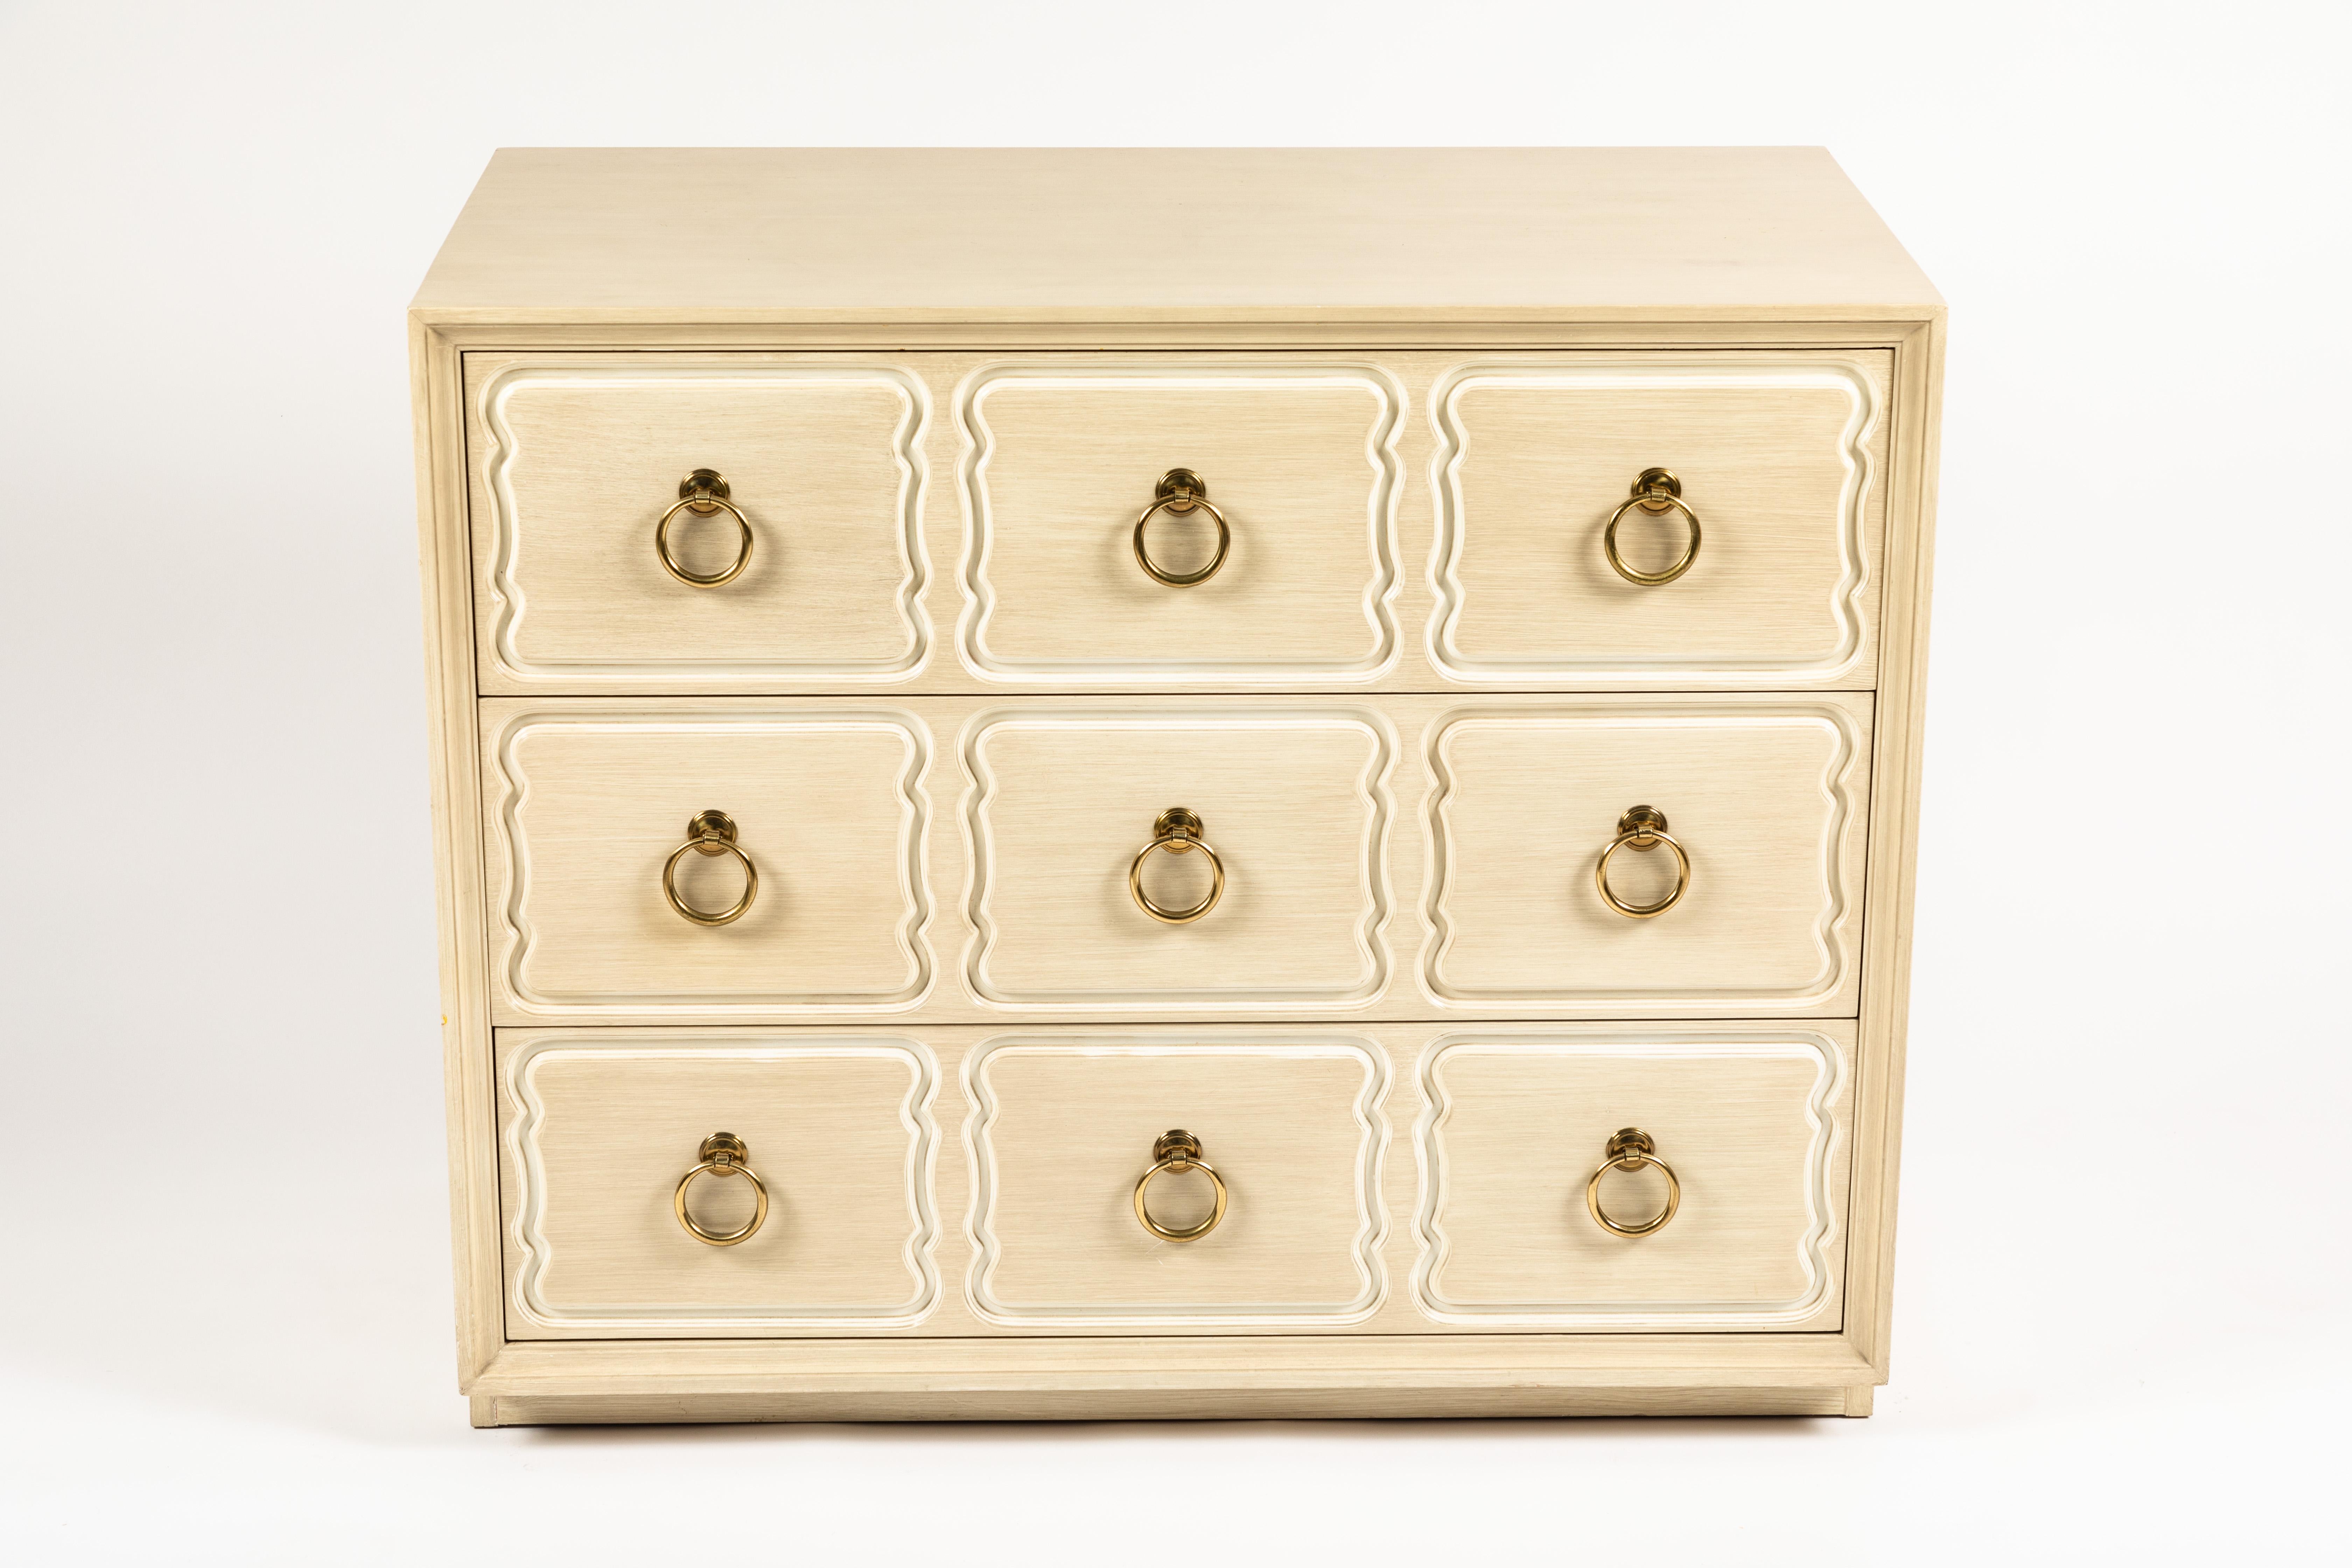 Here is the genuine article, there are many of these chests on the market that are copies and represented as being the model designed by Dorothy Draper. Signed inside the top drawer Heritage. Heritage/Henderdon is the company who was licensed to